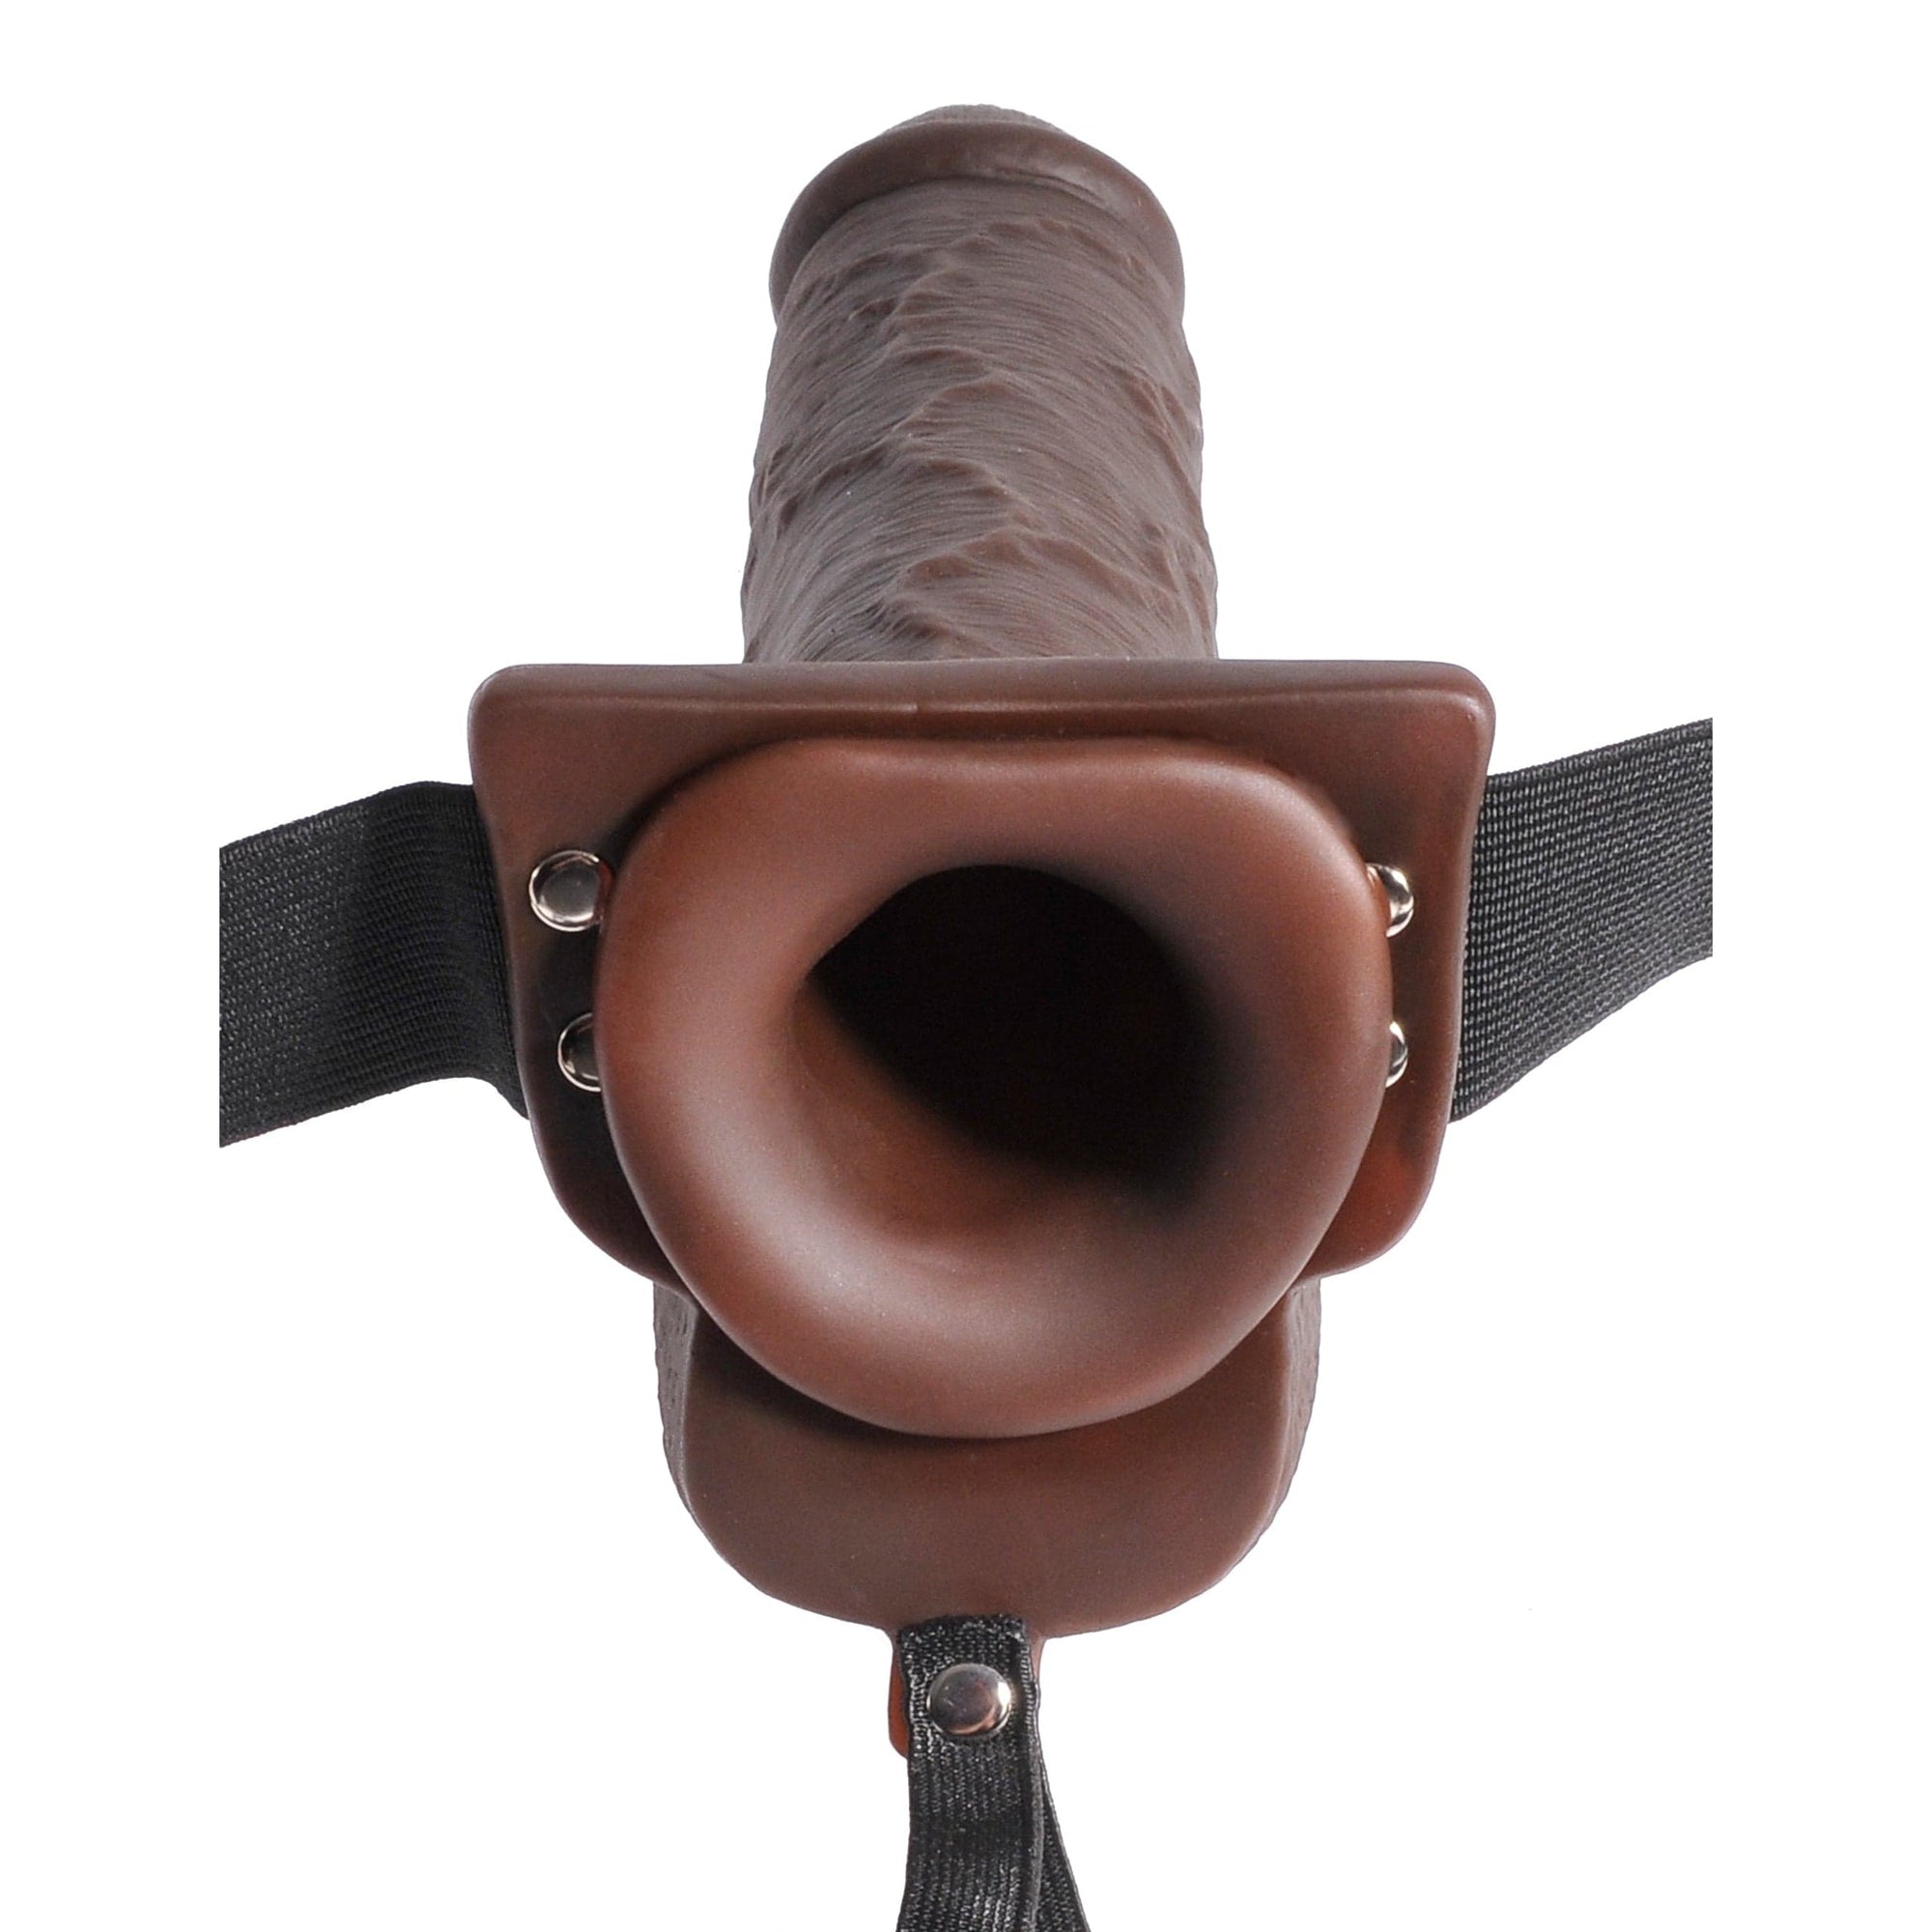 Pipedream - Fetish Fantasy Series Hollow Squirting Strap On Dildo with Balls 9" (Brown) Strap On with Hollow Dildo for Male (Non Vibration) 603912759297 CherryAffairs